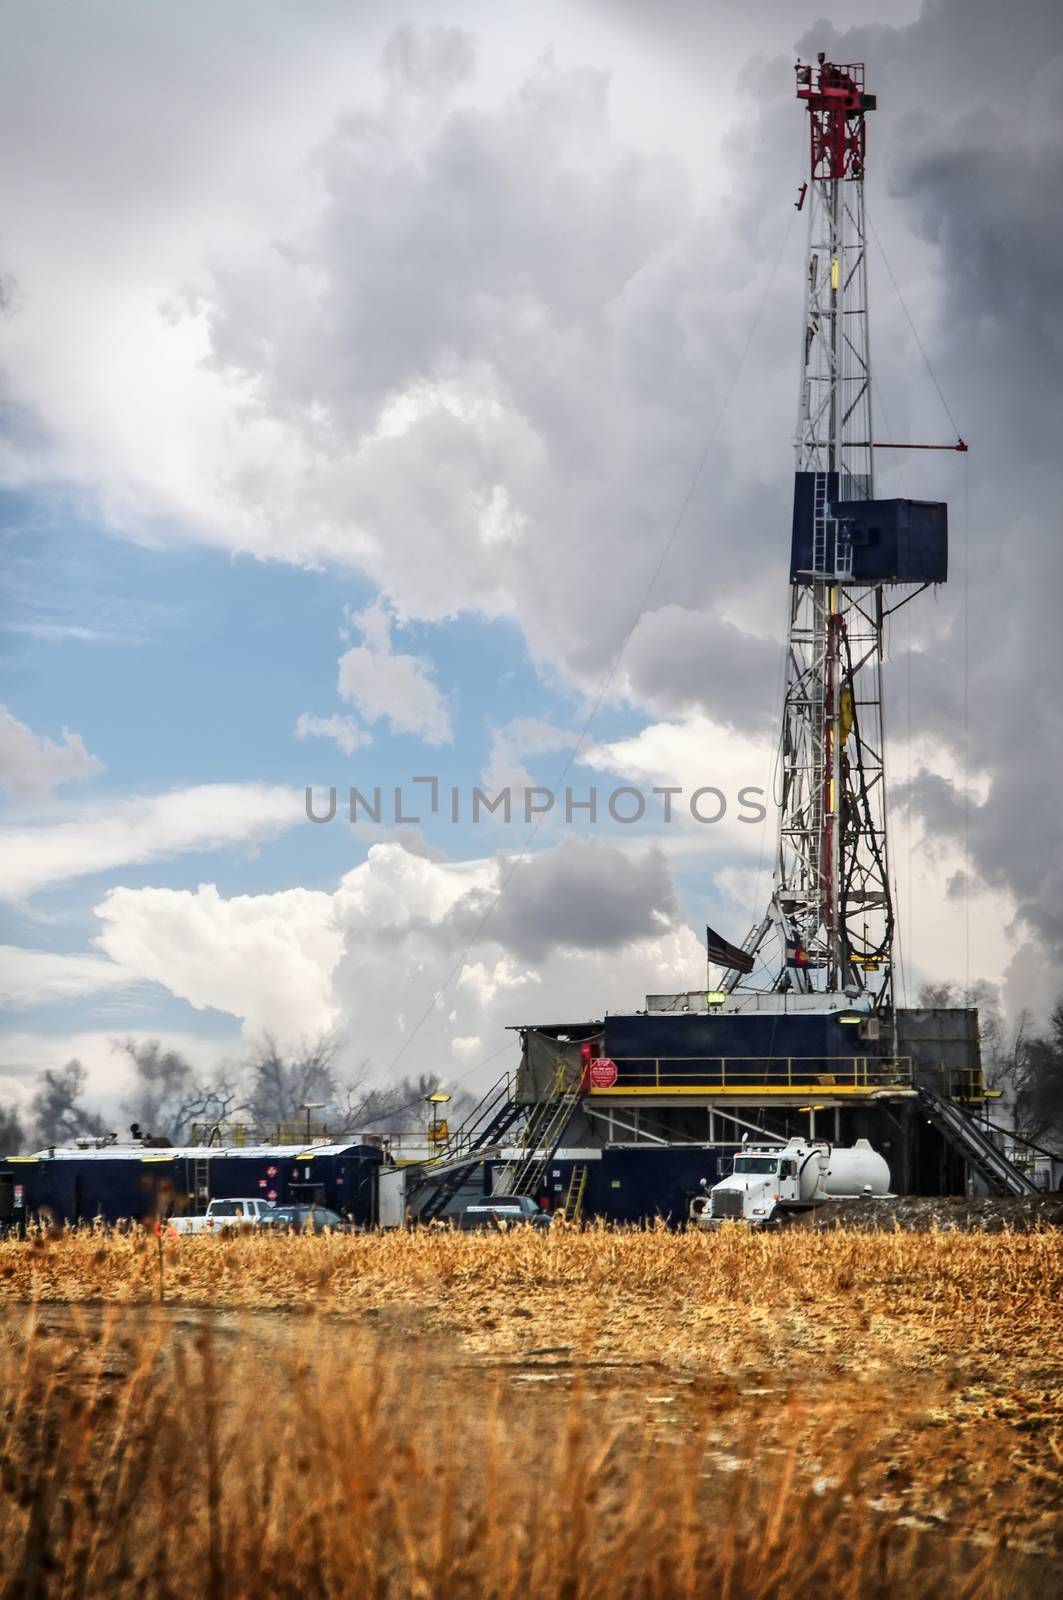 Oil rig in north central Colorado, USA, drilling a gas well under a stormy sky.